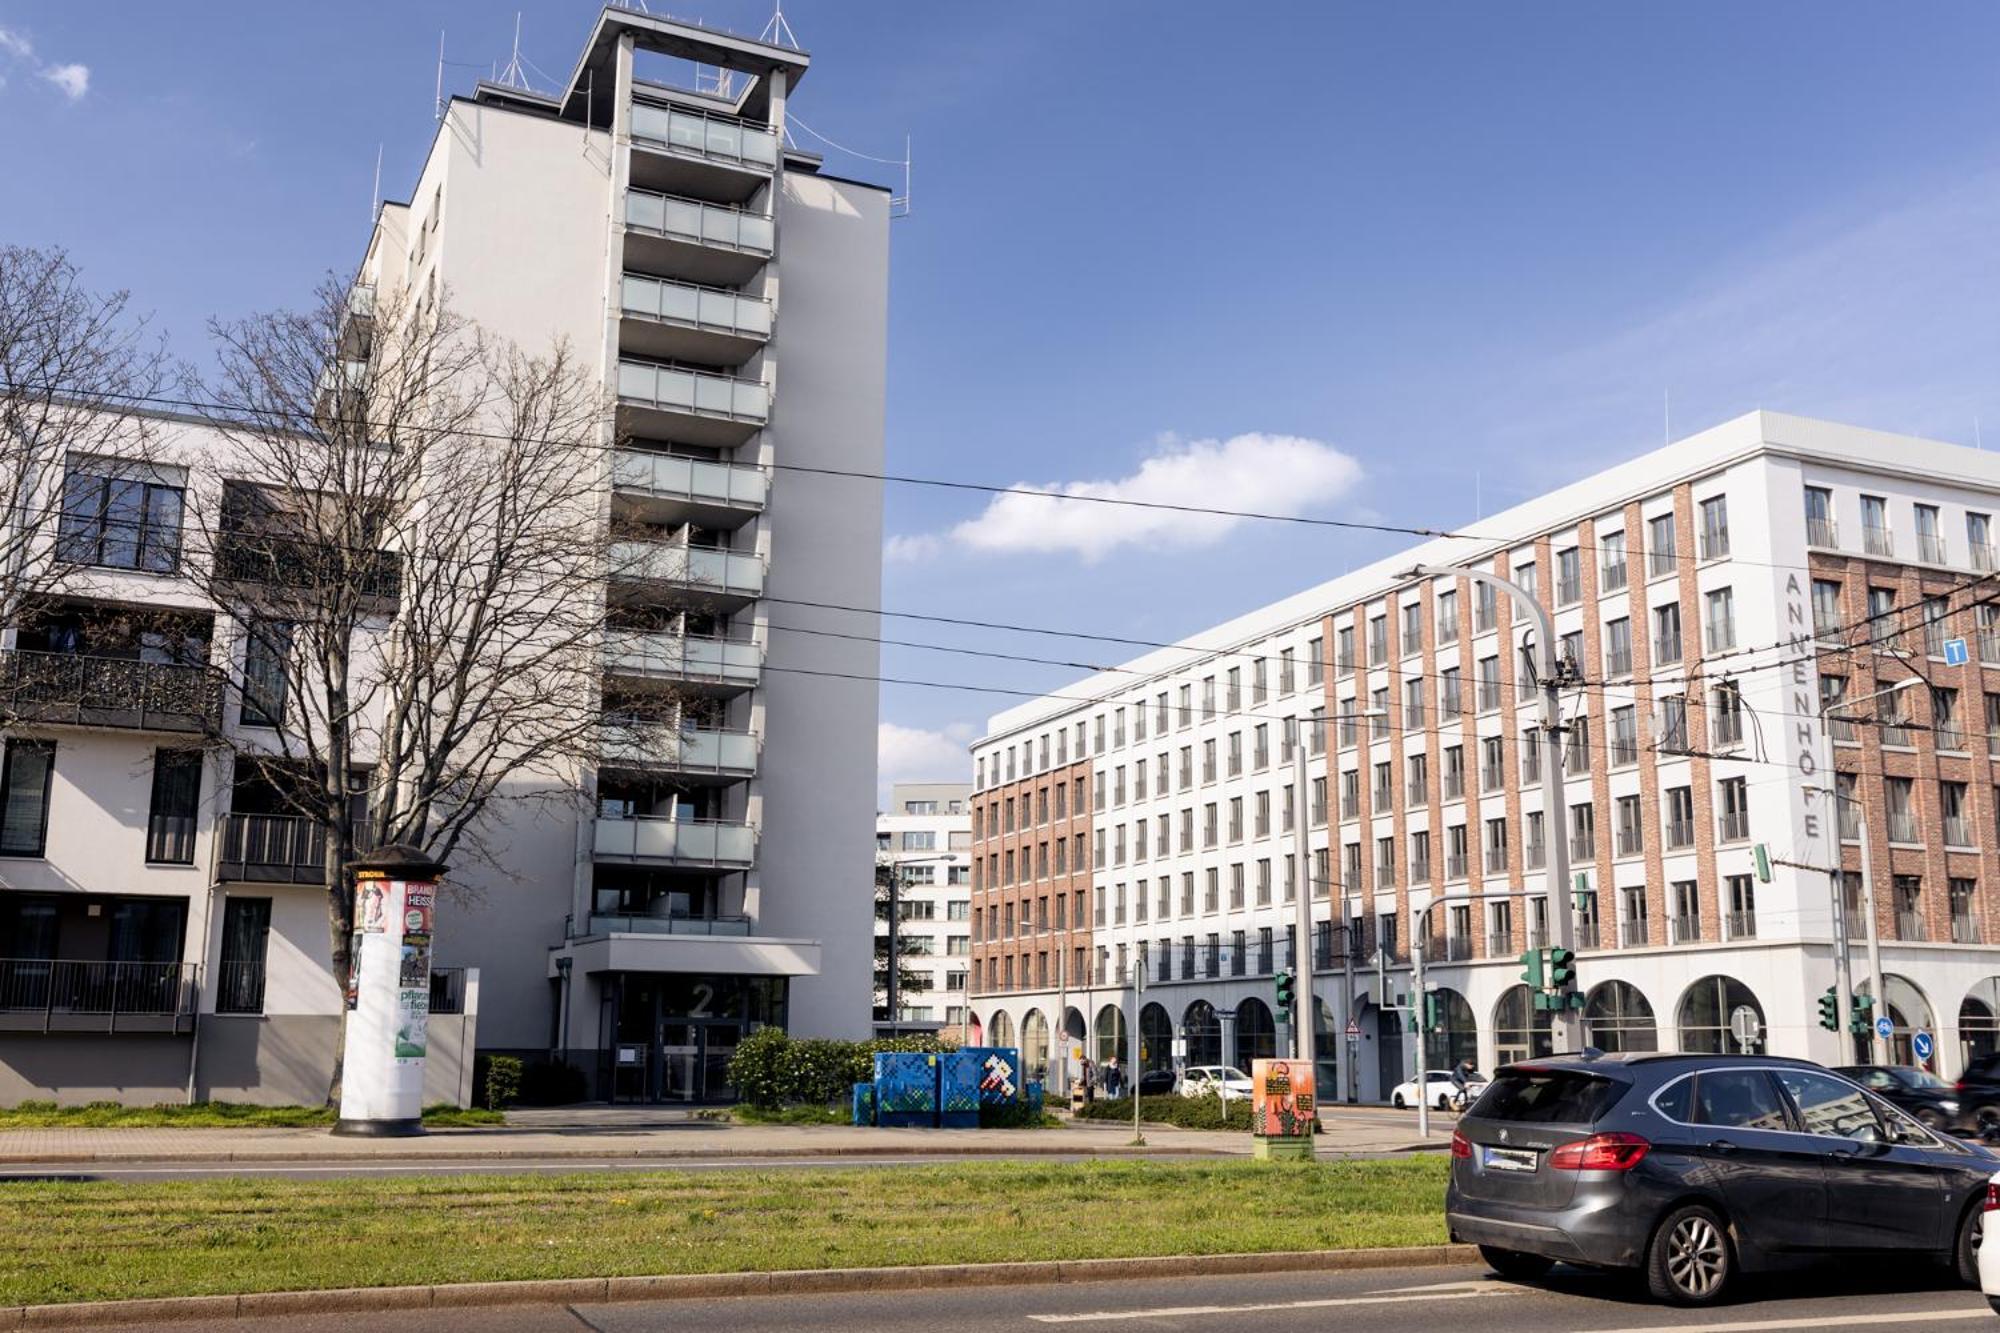 Pineapple Apartments Dresden Zwinger V - 78 Qm - 1X Free Parking Exterior foto